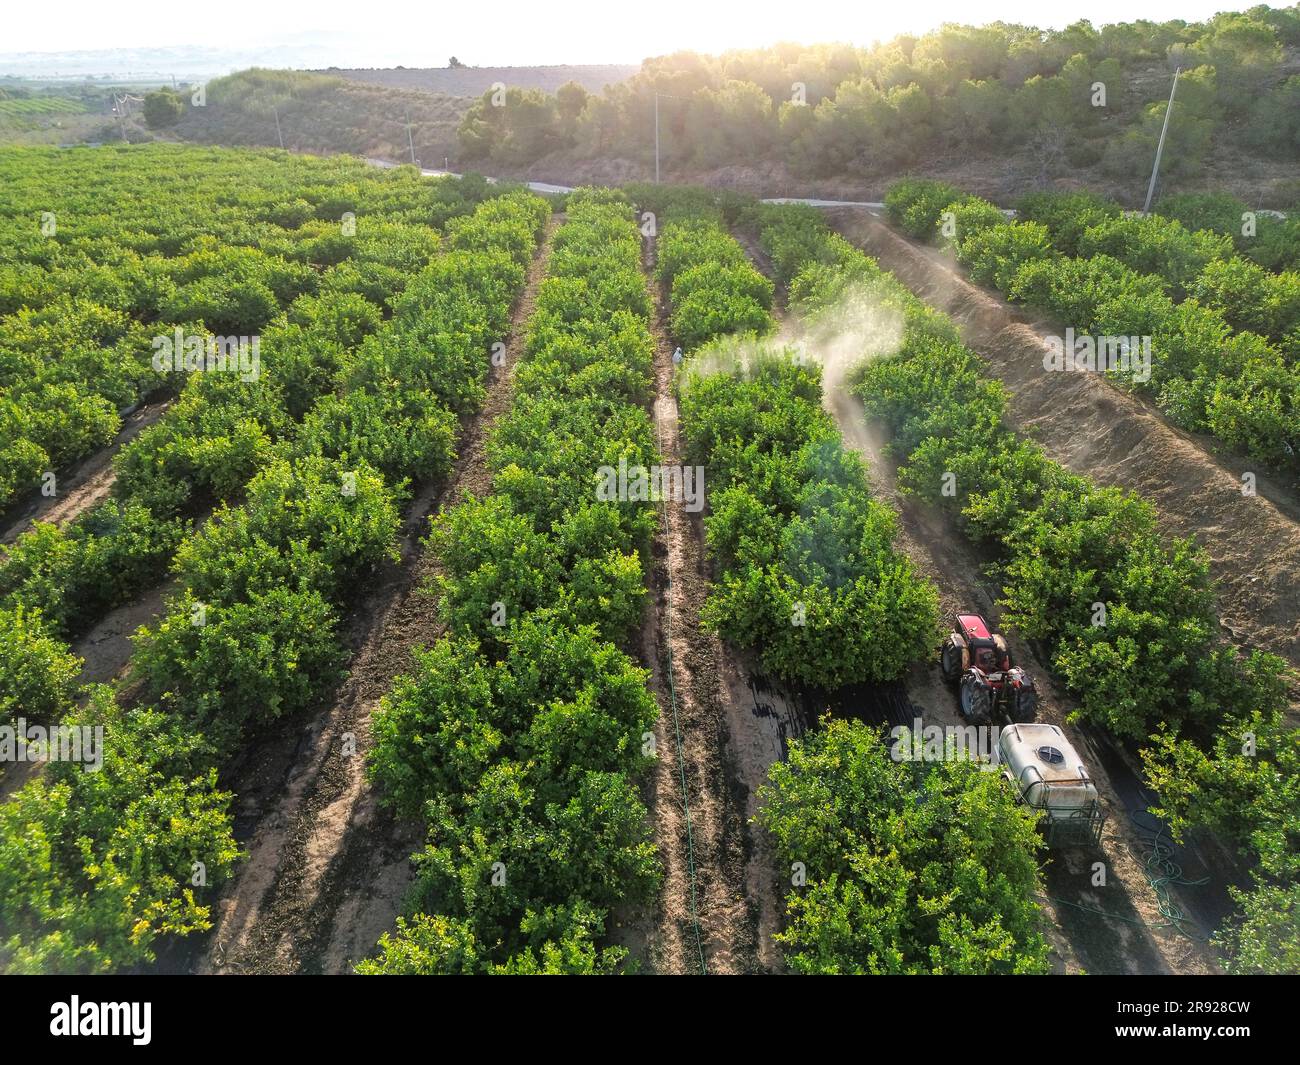 Farm worker spraying pesticide on lemon agricultural field Stock Photo